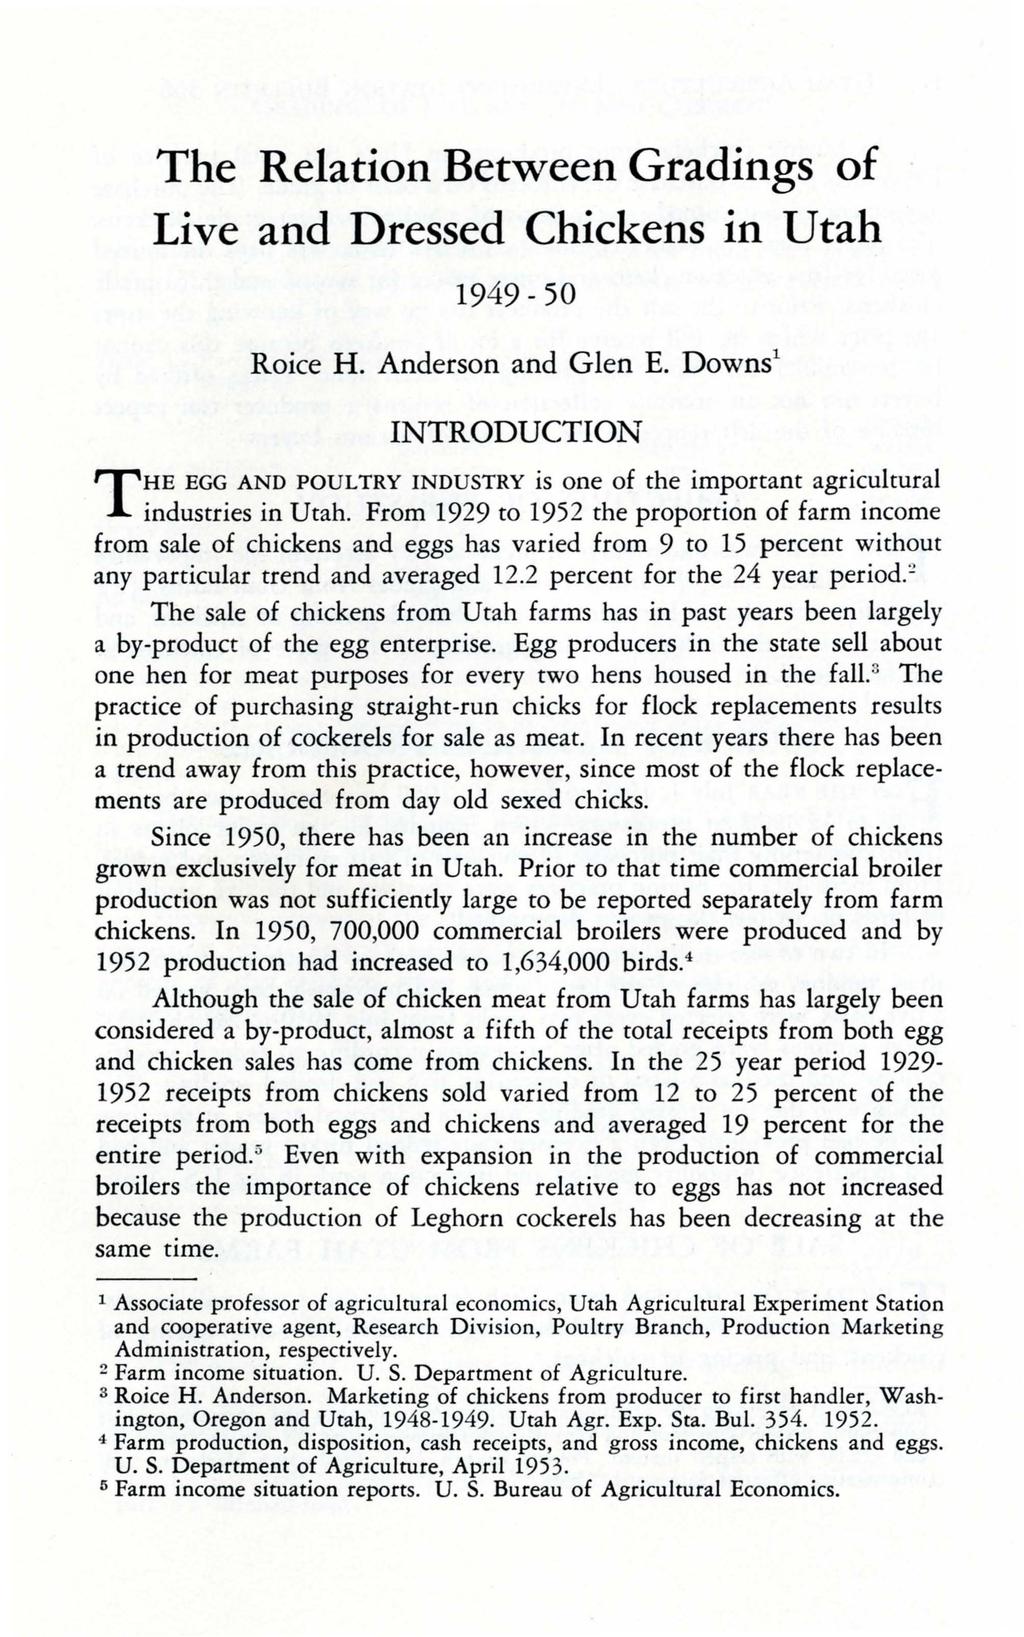 The Relation Between Gradings of Live and Dressed Chickens in Utah 1949-50 Roice H. Anderson and Glen E.